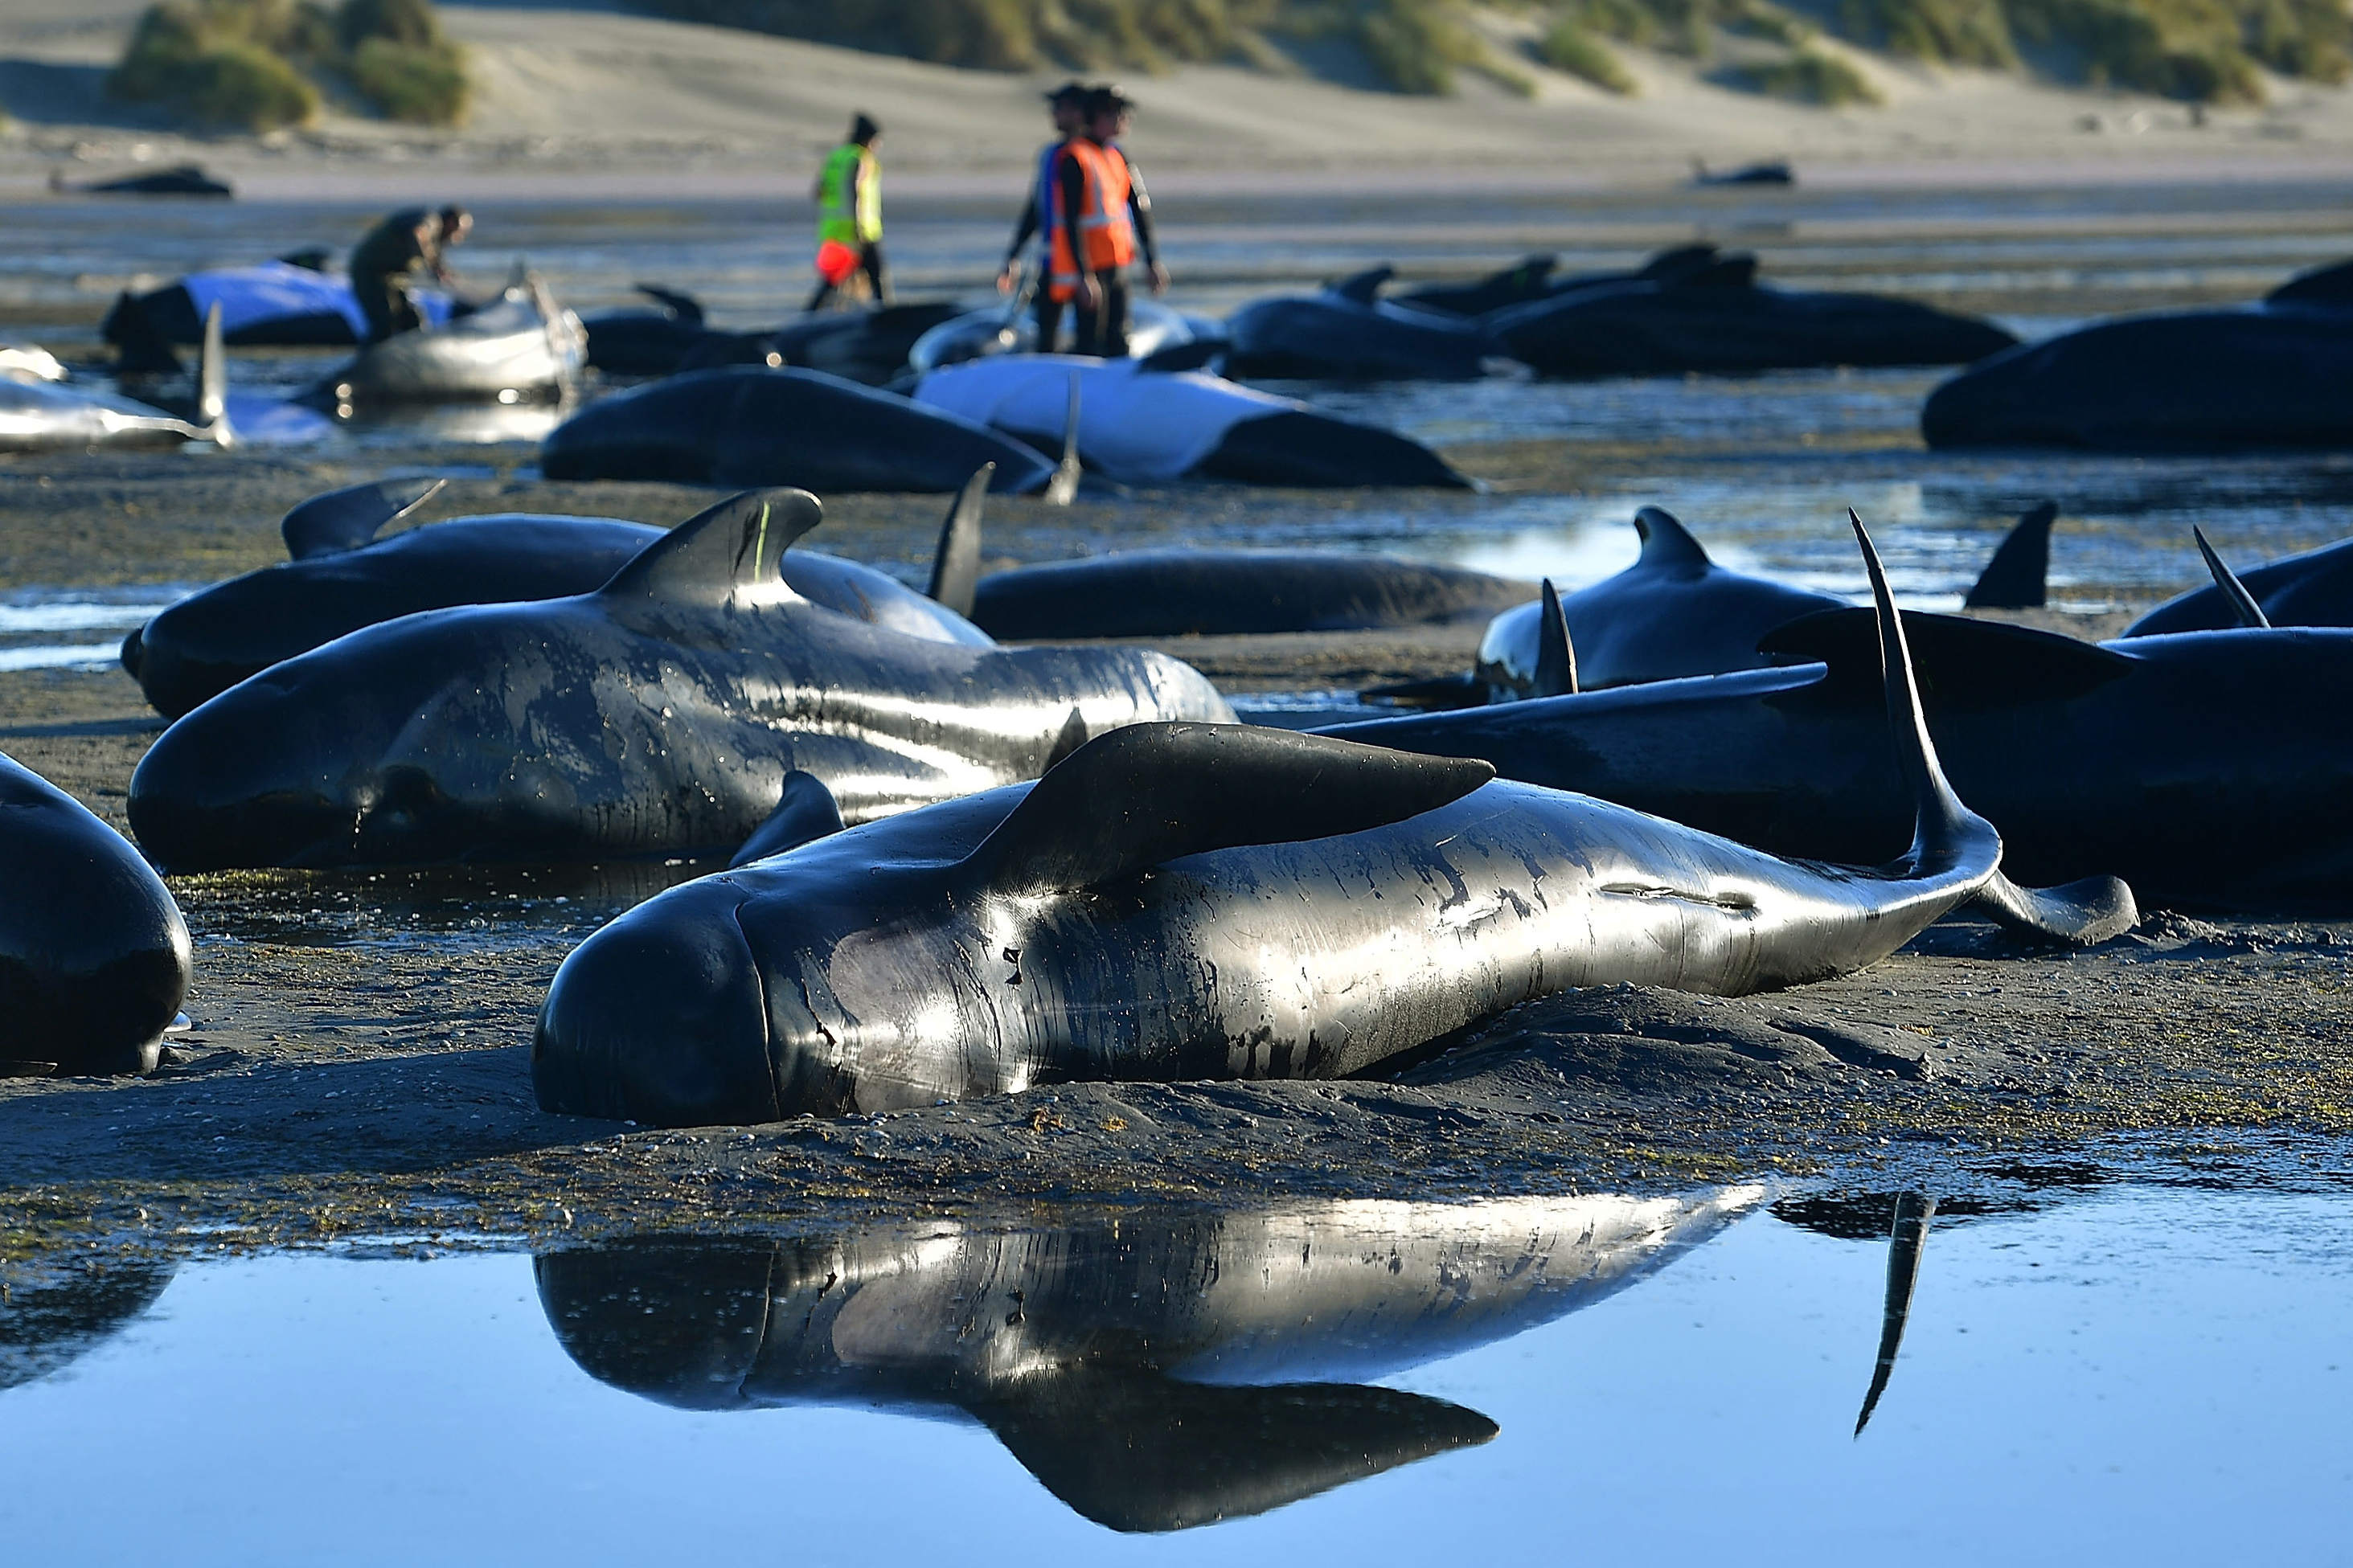 Mystery Surrounds Stranded Whales Who Got Back in the Ocean